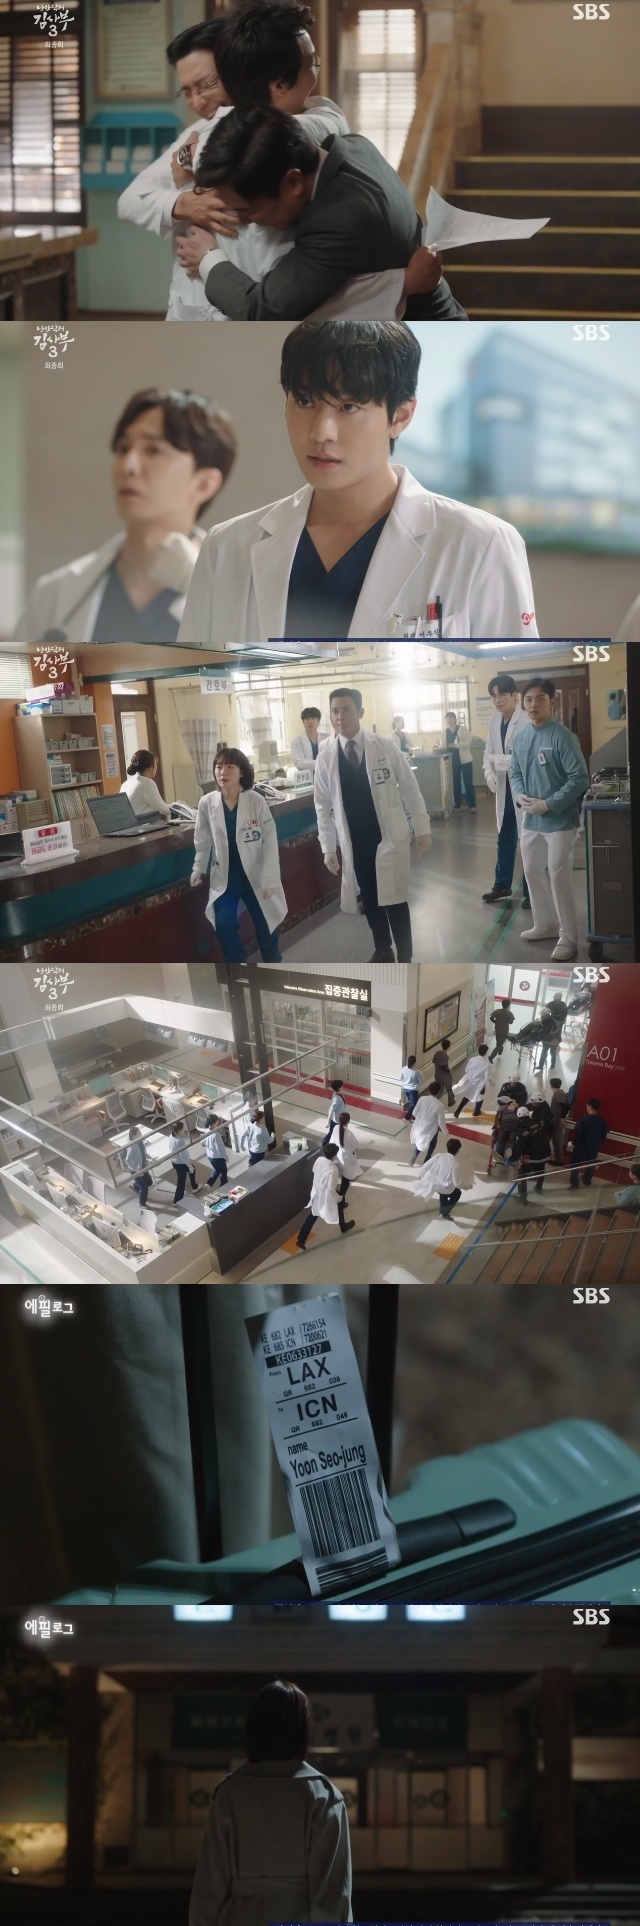 Following Yoo Yeon-seok, Seo Hyun-jin came back and Han Suk-kyus dream team Stone wall was completed.SBS drama Dr.Romantic 3 (playwright Kang Eun-kyung, Lim Hye-min / director Yoo In-sik, Kang Bo-seung) In the 16th session, Stone wallHospital, which passed the forest fire Danger safely, started to move forward with a bigger future.It was notorious to find Master Kim (Han Suk-kyu) who was worried about disappearing during the evacuation.I know better than anyone who wants to leave the trauma center as a dream of my disciples, said Master Kim, who is looking around the operating room for the last time before the evacuation. Even if the forest fires pass and the Stone wallHospital becomes ashes, As long as there is gravity, the Stone wall will be eternal.As soon as this was over, a miraculous thing happened: rain clouds began to pour rain on the StonewallHospital as well as on the forest fire scene.Thanks to this, Stone wallHospital passed Danger, which was going to be ashes, safely and started receiving patients again.And the first patient of this Stone wallHospital was an assistant and attendant of Ko Kyung-sook (Oh Min-ae), who was seriously injured after going on a fire site inspection.Unlike his aides and attendants, Ko Kyung-sook, a minor abrasion, witnessed all of the medical staff from CPR to night surgery, and from Master Kim, who came out of surgery the next day, What are you doing to rebuild a new city?If you get sick, you dont have a hospital to go to. Wildfires are not the only disaster. There is no hospital to go to. Dying in an ambulance is also a disaster. Your son is heartbreaking, but do not turn away from what you have to do by using the death as an excuse.Do politics properly, not politics. Afterwards, Ko Kyung-sook changed his mind and decided to support the trauma center.Kang Dong-ju (Yoo Yeon-seok) confessed his dream of Level 1 to Seo Woo Jin (Ahn Hyo-seop).Kang dong-ju said, From Gangwon-do, Chungcheongbuk-do, and Gyeongsangbuk-do, we receive all the severely ill patients within one hour by doctor helicopter, all the way to pediatric trauma.I do not want to die because I do not have a doctor to operate, I do not have a hospital to receive it, so I do not wander the streets, so we can cover all the serious trauma patients in our area. I do not want to run to Level 1 with me, he reached out to Seo Woo Jin.The dream of kang dong-ju became the dream of Seo Woo Jin. Seo Woo Jin, who started to breathe again, eventually decided to join the trauma center.From Master Kim, There is no right answer anywhere in the world, so do not look for answers, but find what you want to do.Jangdonghwa (Lee Shin-young), who heard the advice that you can be happy because you are really happy, will be your answer, he decided to do another four months at Stone wallHospital, which he disliked so much.